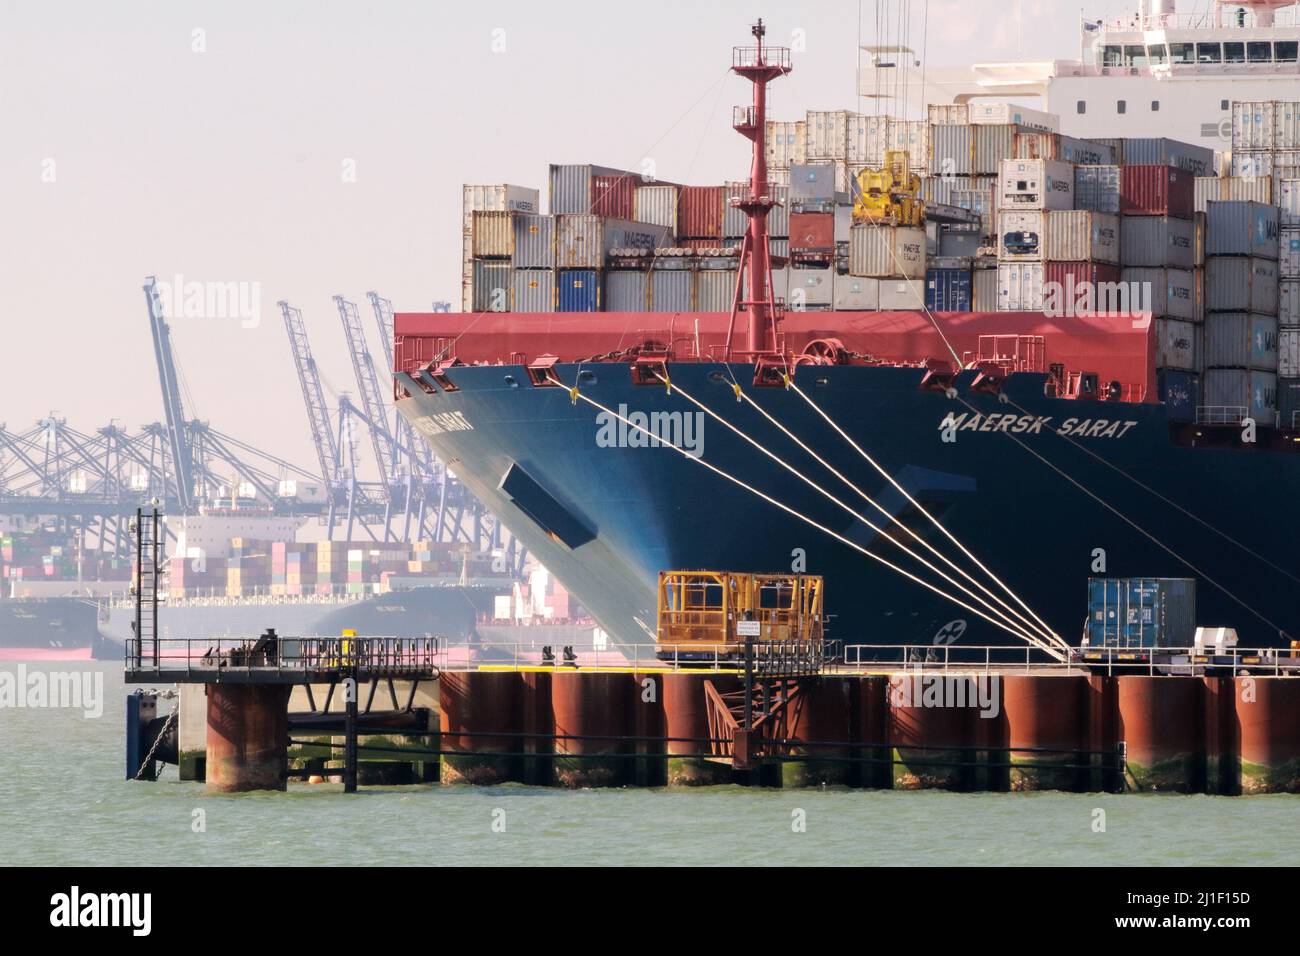 'Maesrk Sarat' rests at Felixstowe Container Port Stock Photo